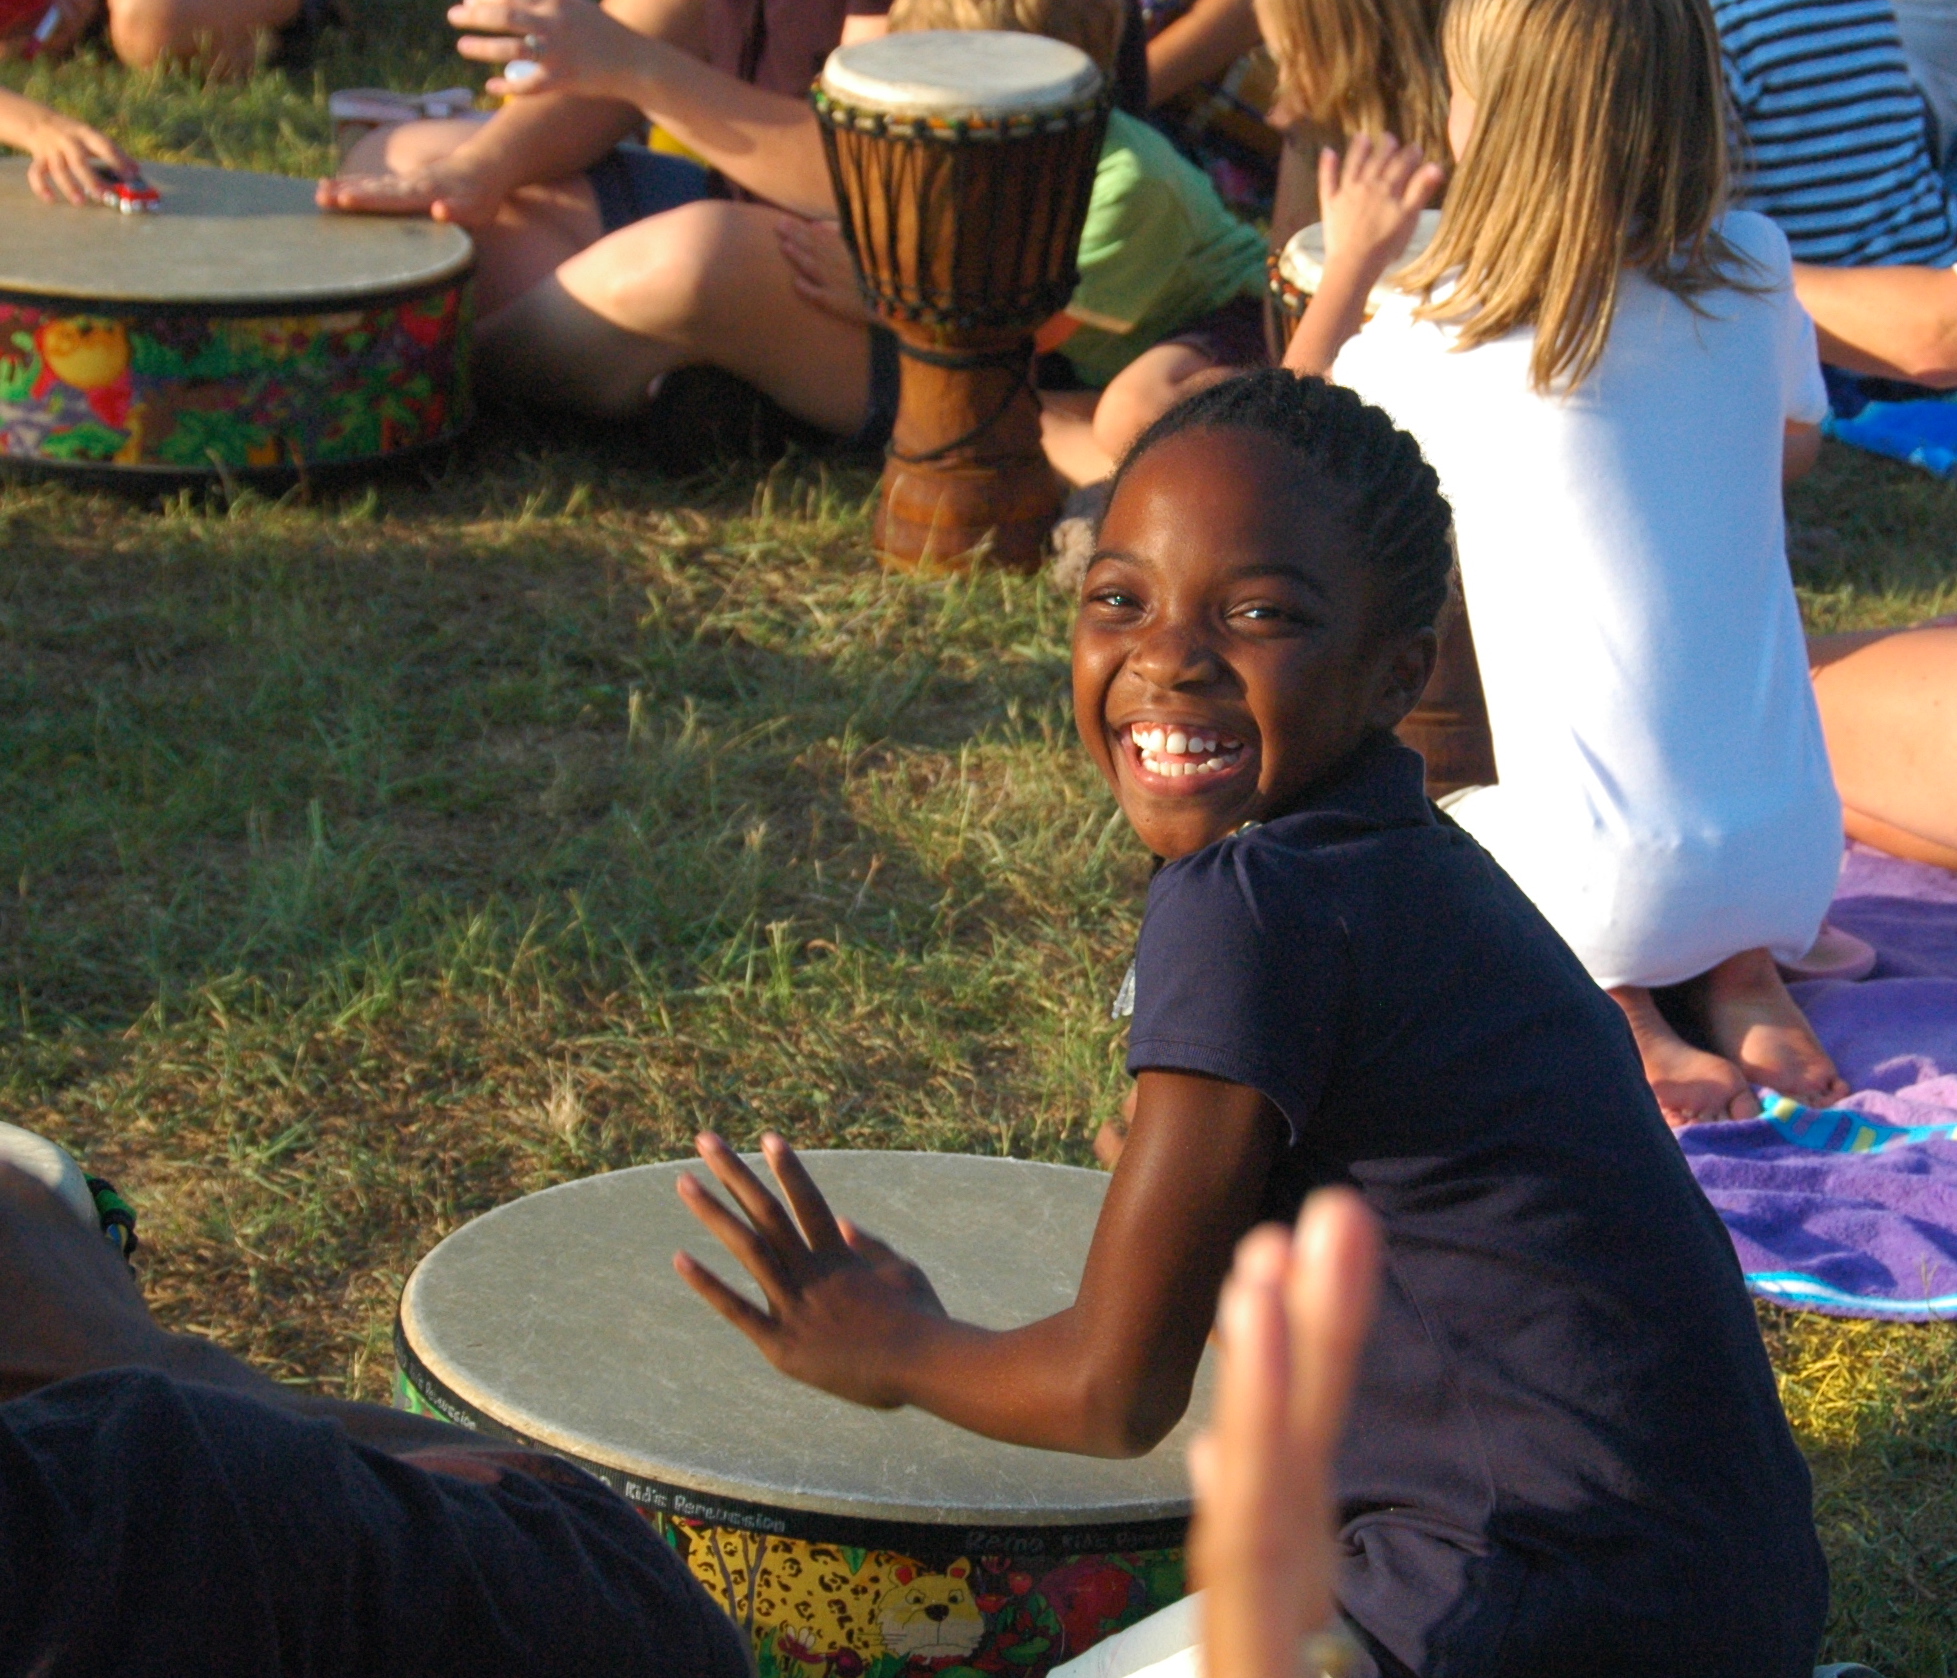 A Fam Jam with Beatin' Path celebrates your community with music & rhythm.